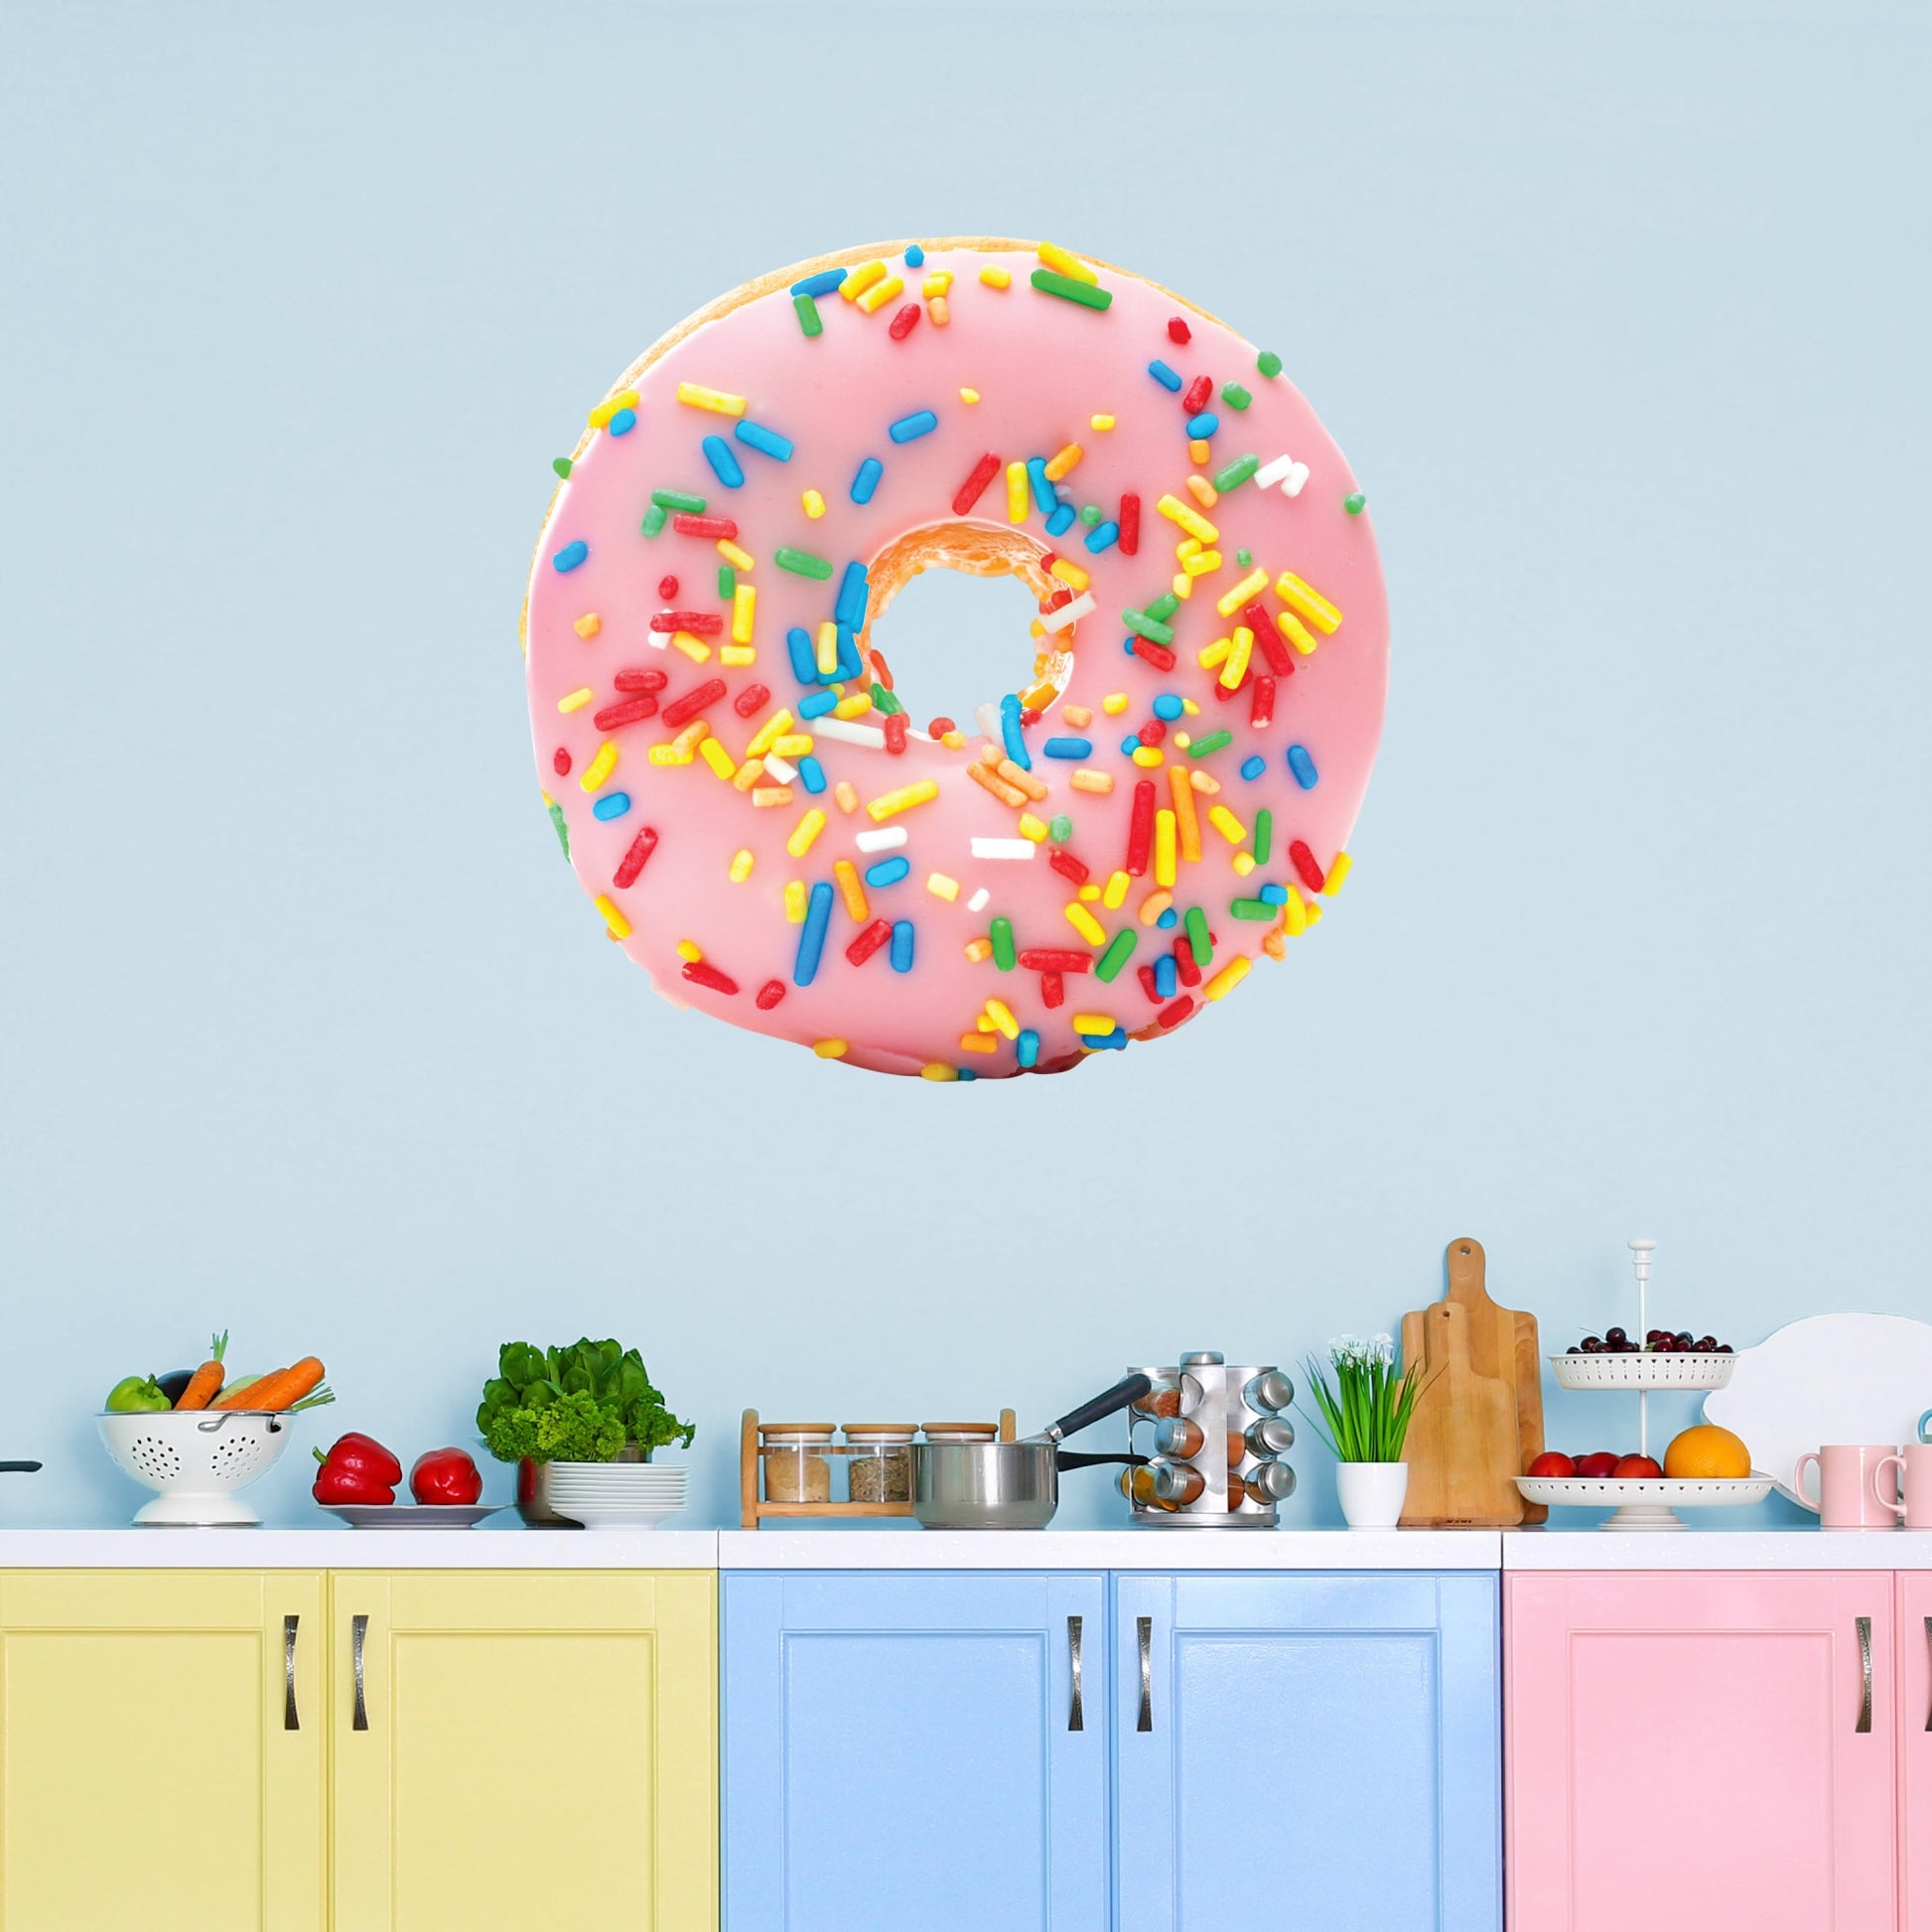 Large Donut + 2 Decals (11"W x 10"H)